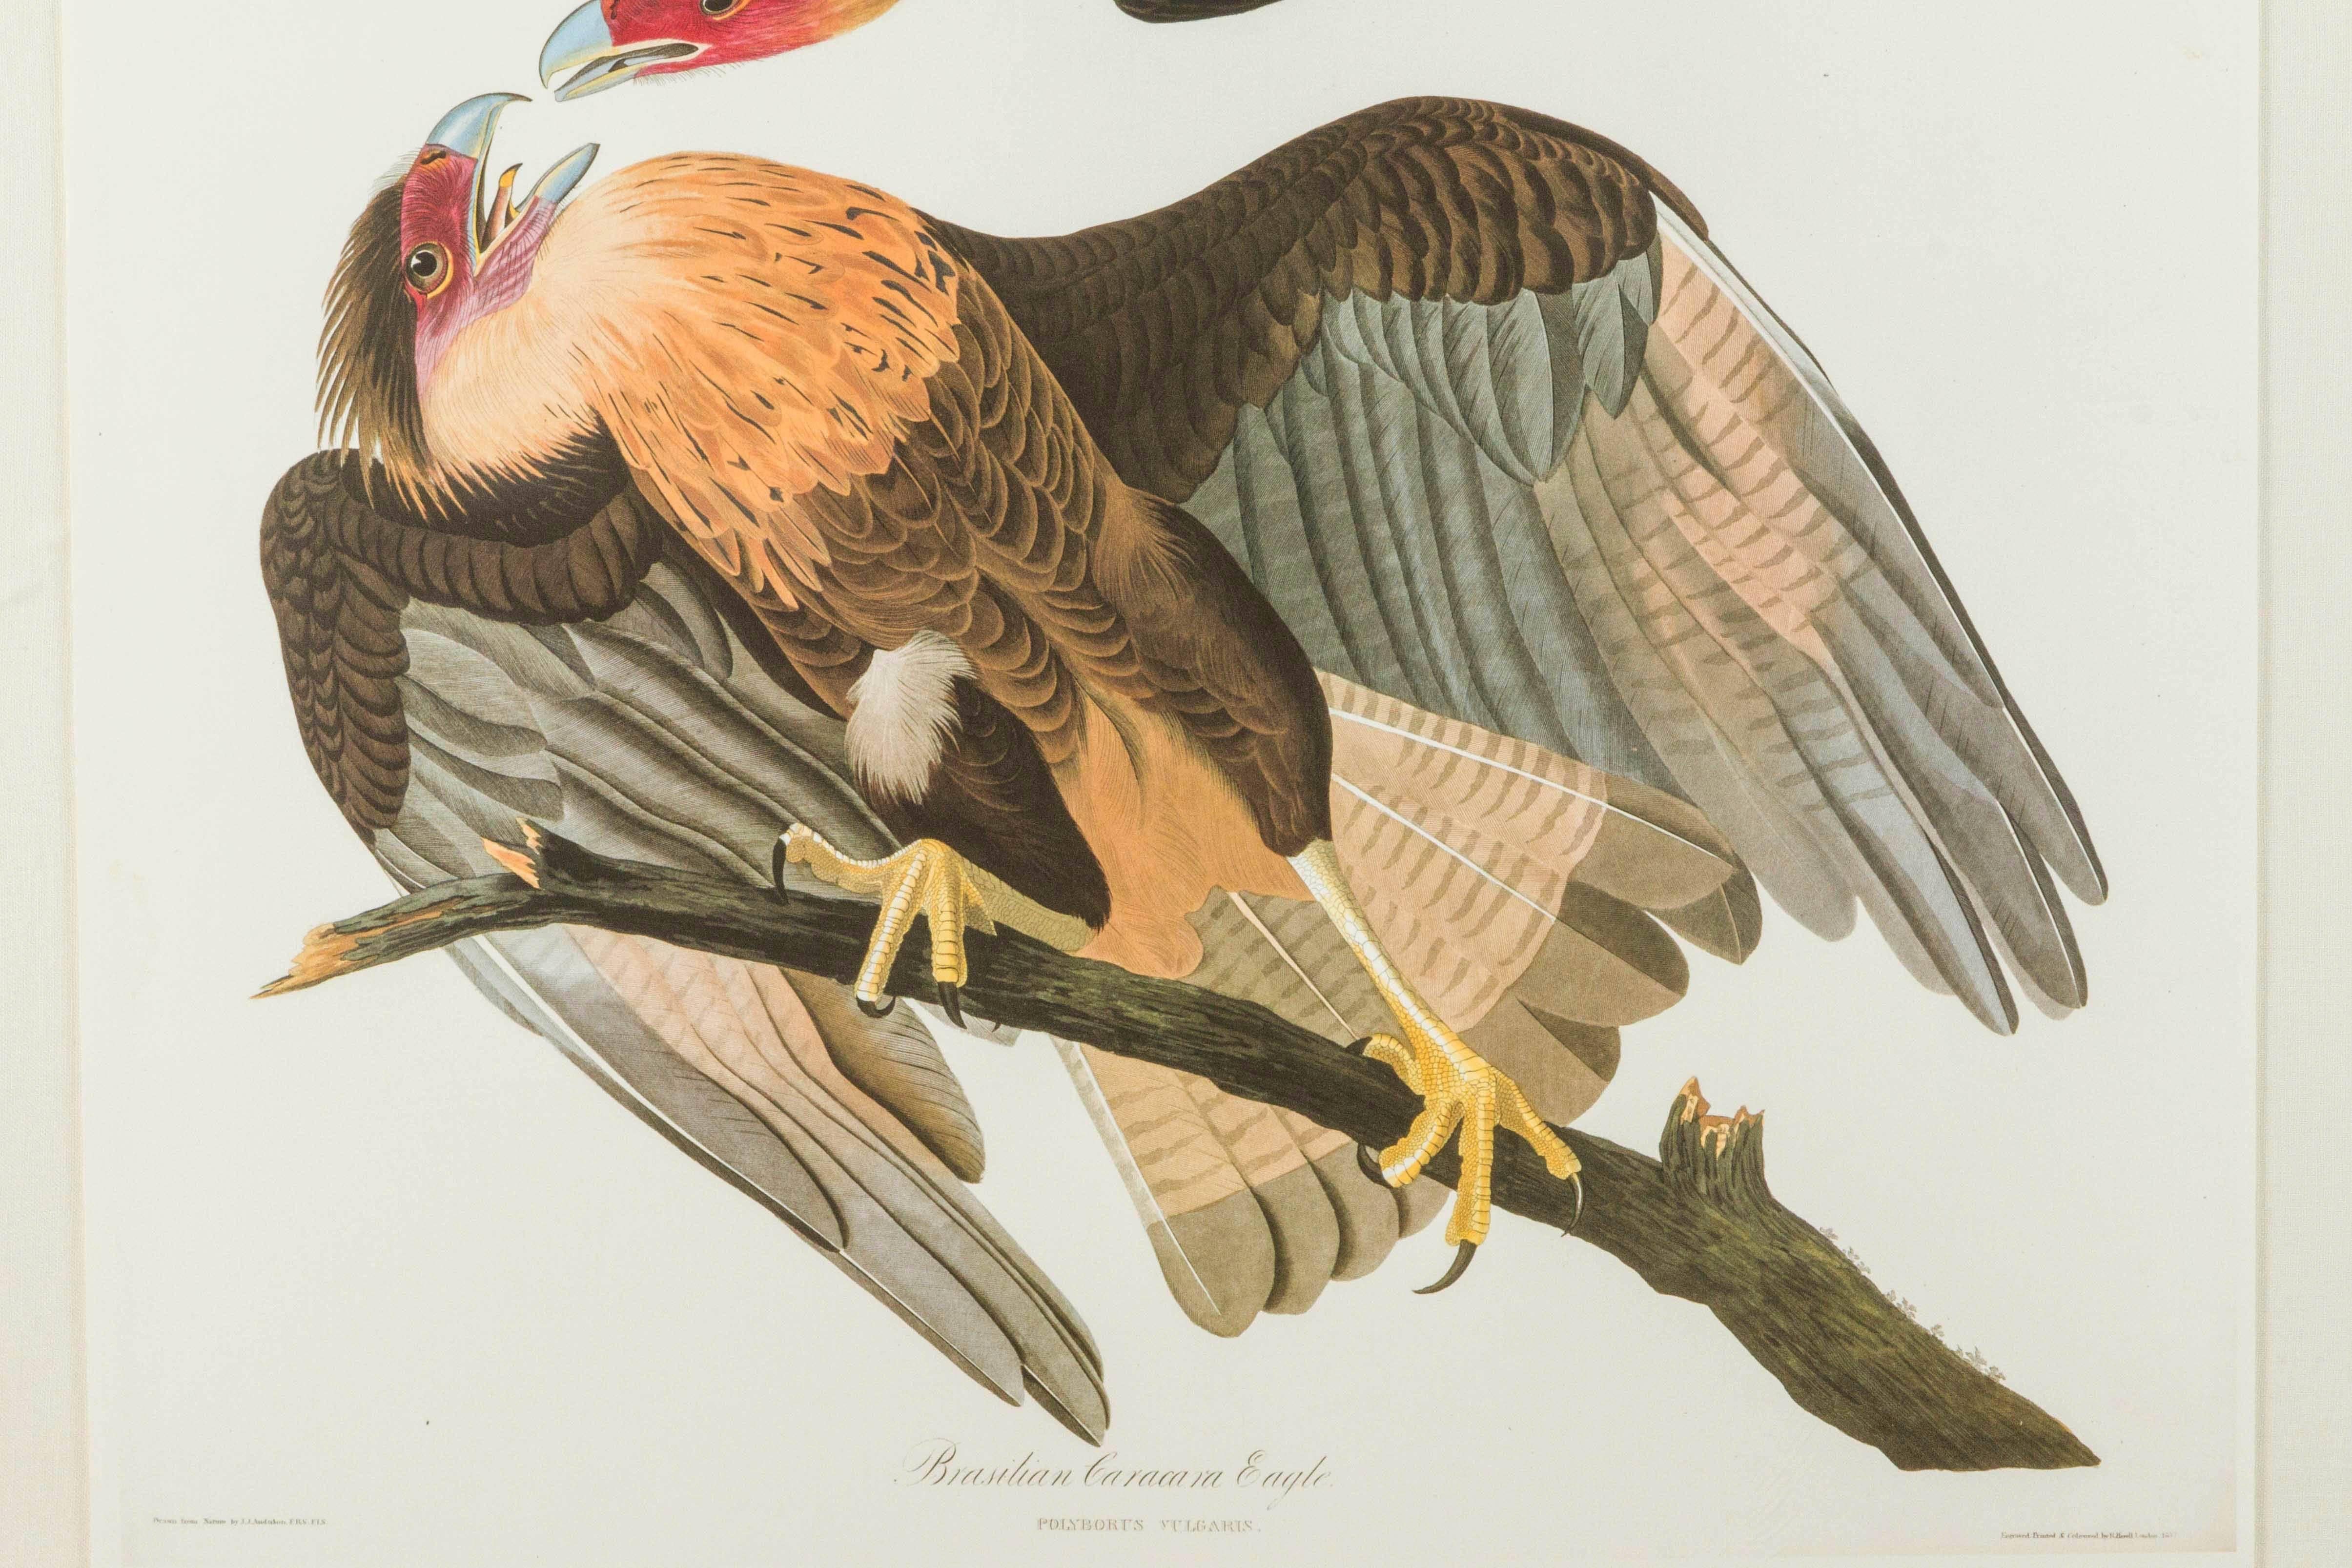 Drawn from nature by J.J. Audubon and engraved, printed and colored by R. Havell 1833.